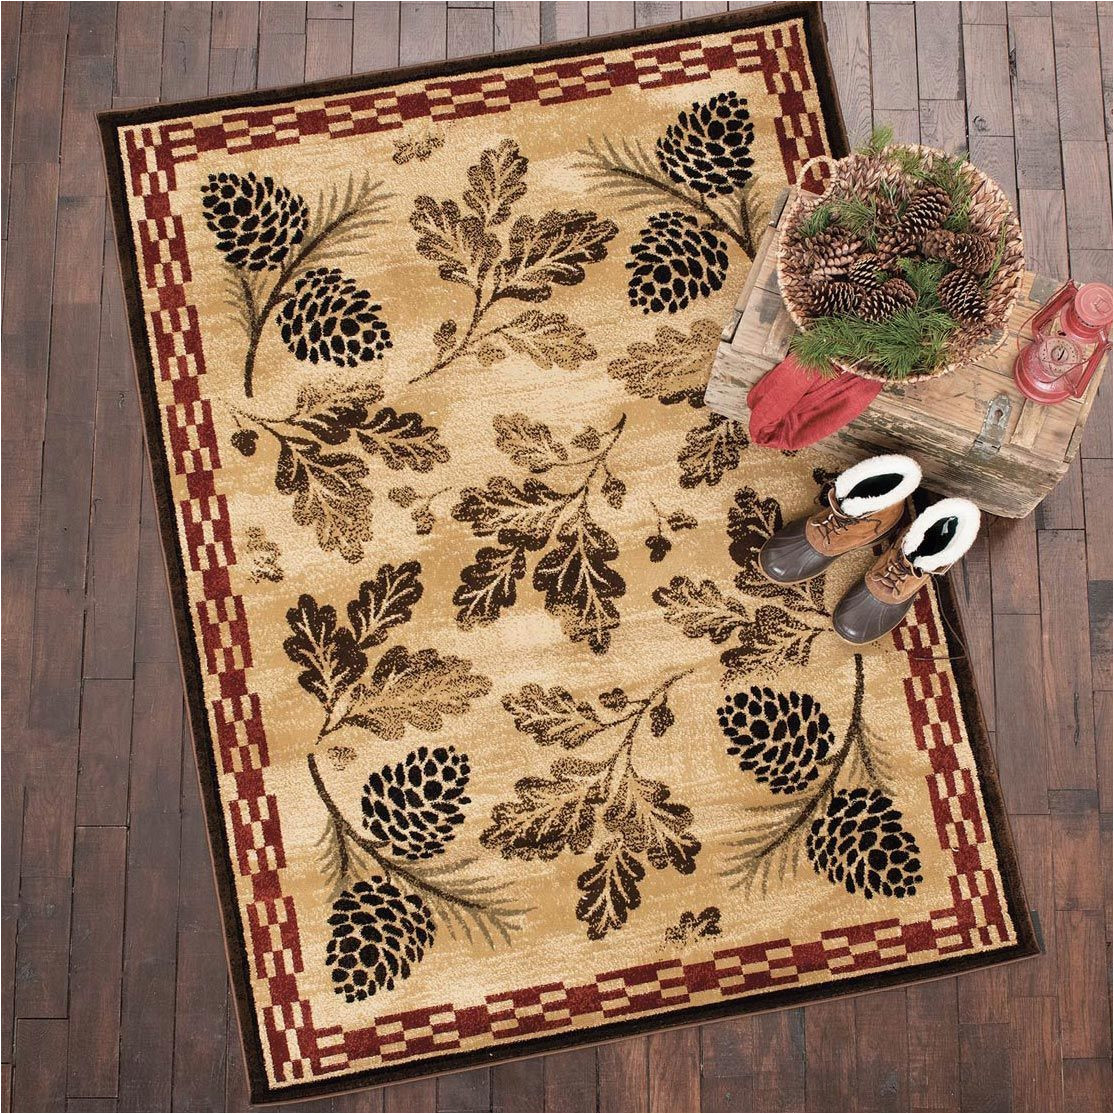 Black forest Decor area Rugs Royal Pines Rug 8 X 10 In 2020 Black forest Decor